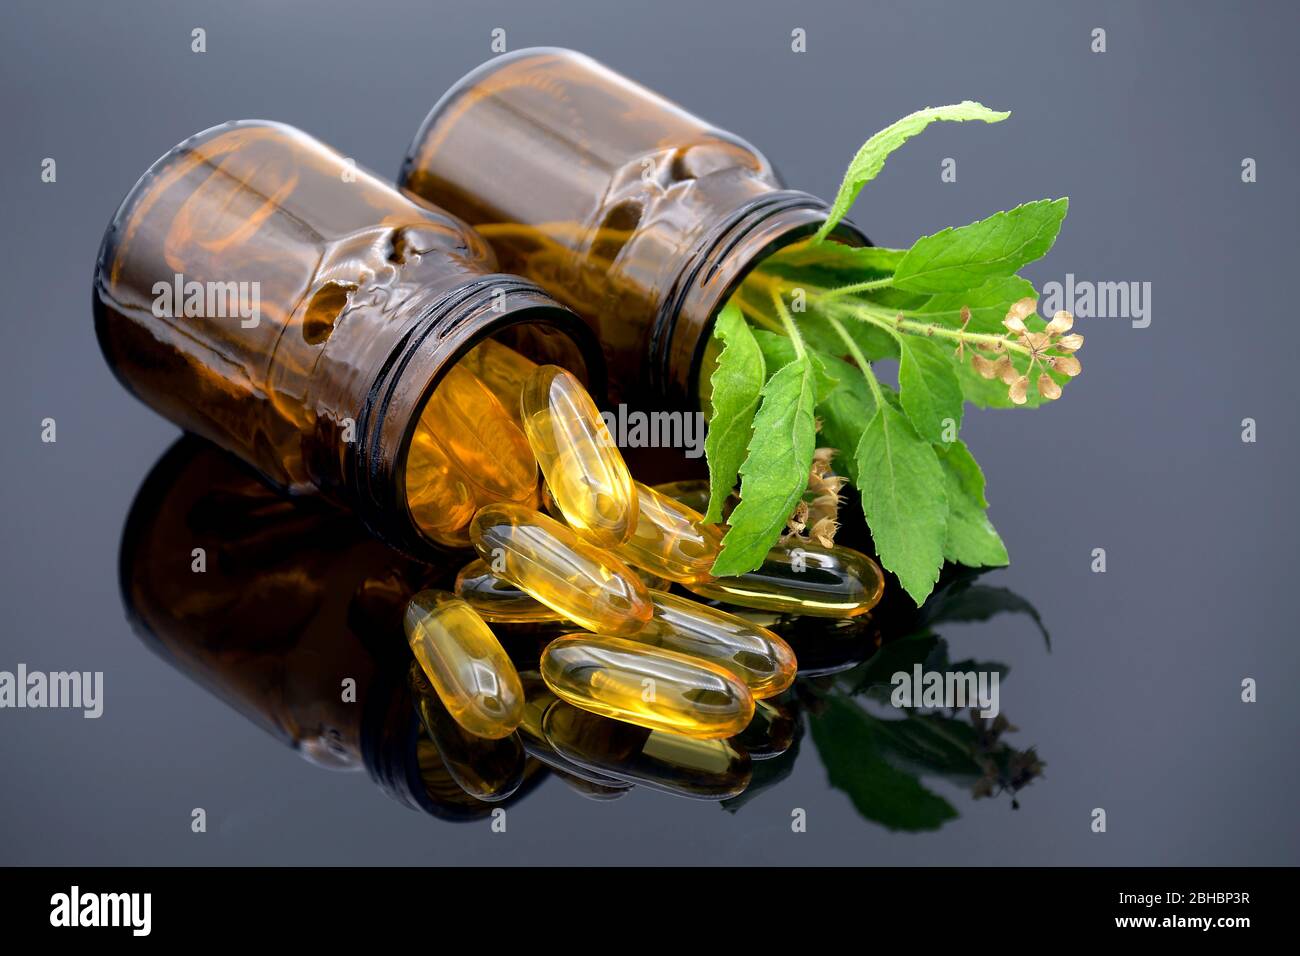 Oil in capsule, amber bottle and fresh herbs on dark background in traditional medicine concept. Stock Photo